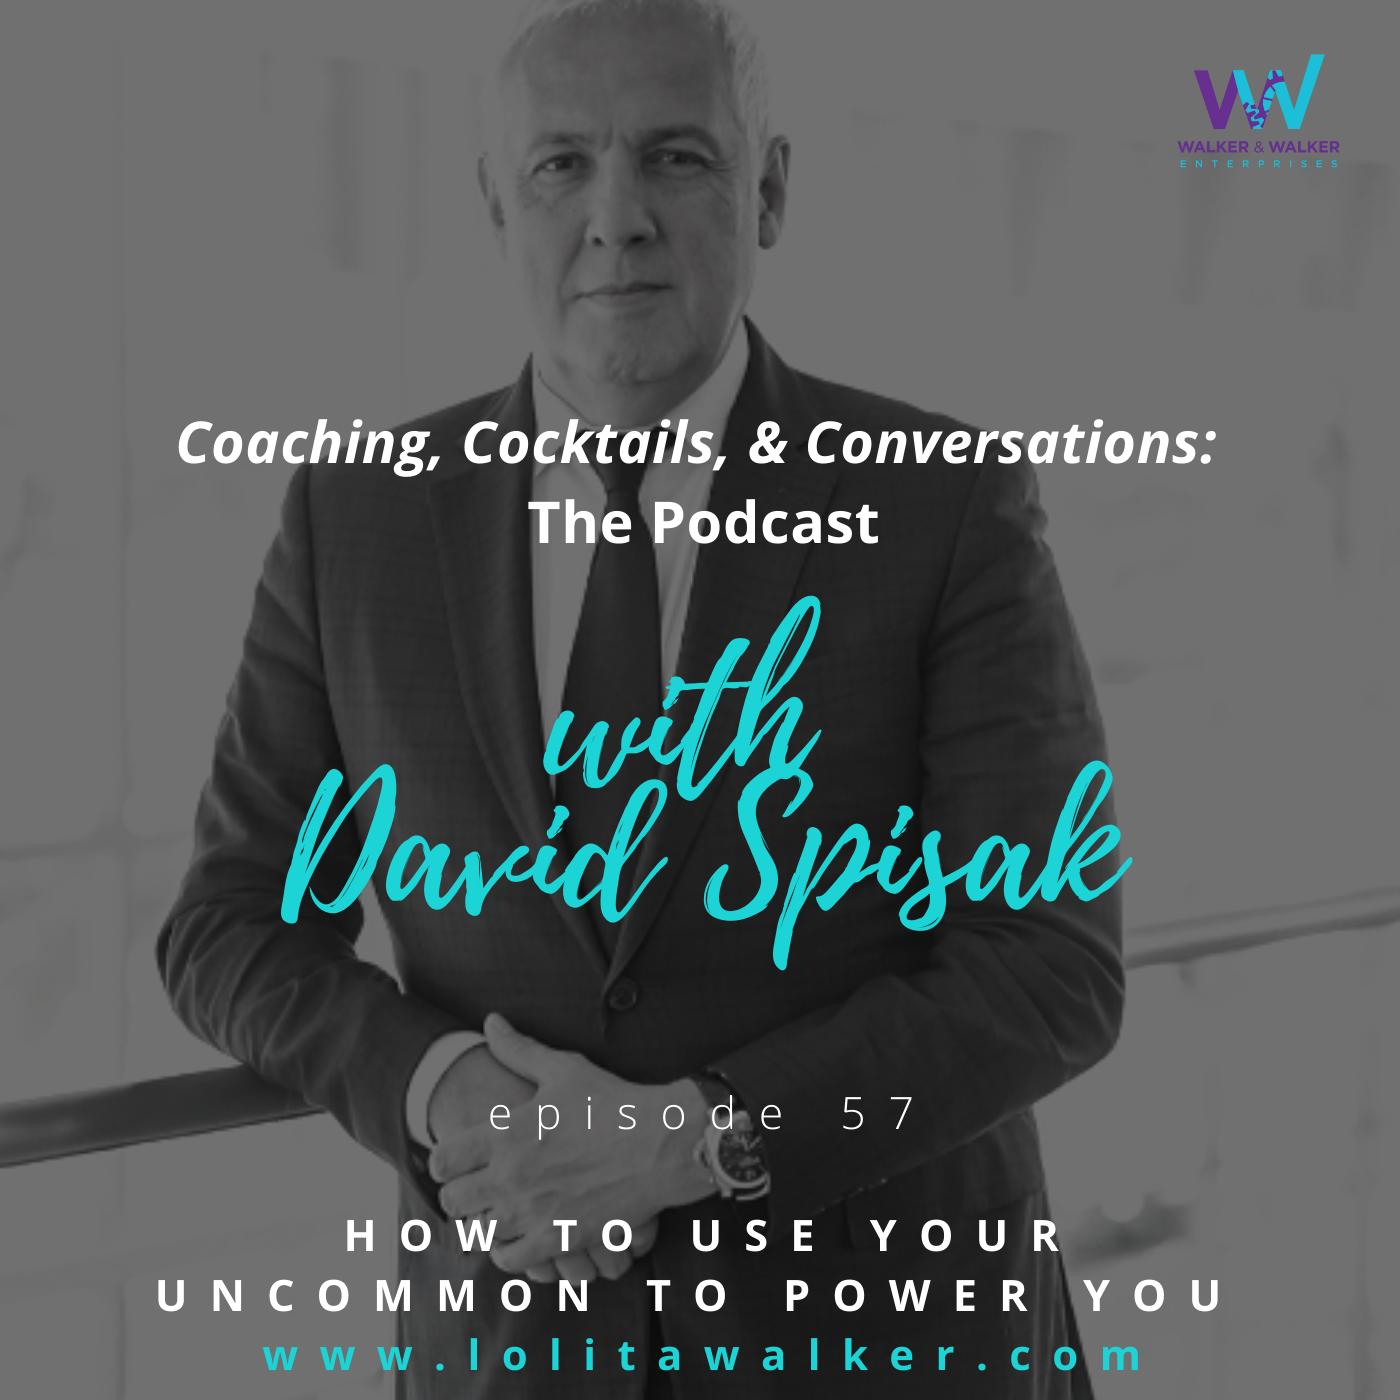 S3E57 - How to Use Your Uncommon to Power You (with David Spisak) Image